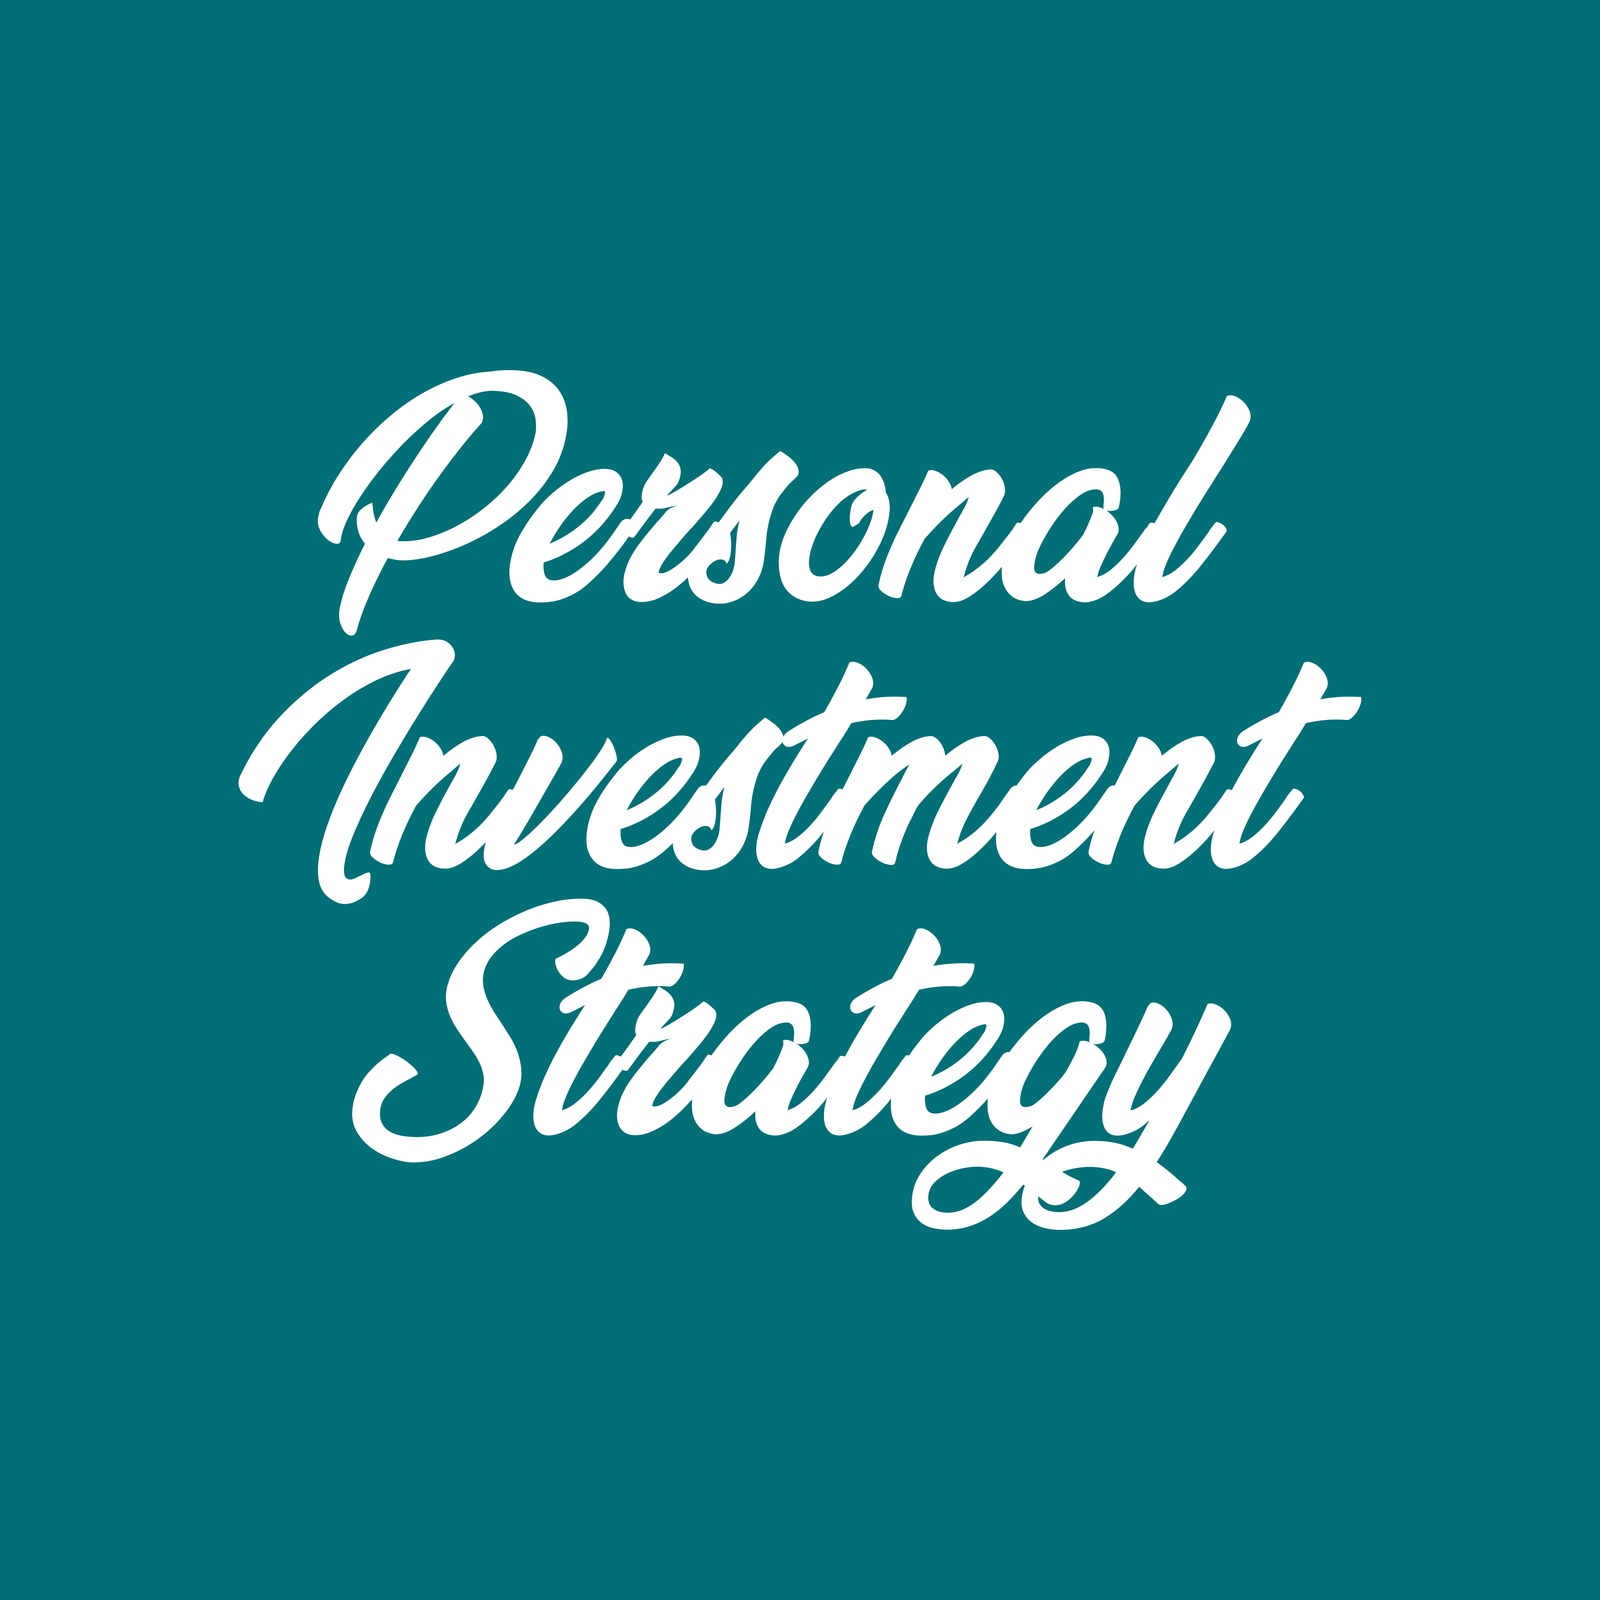 Personal Investment Strategy